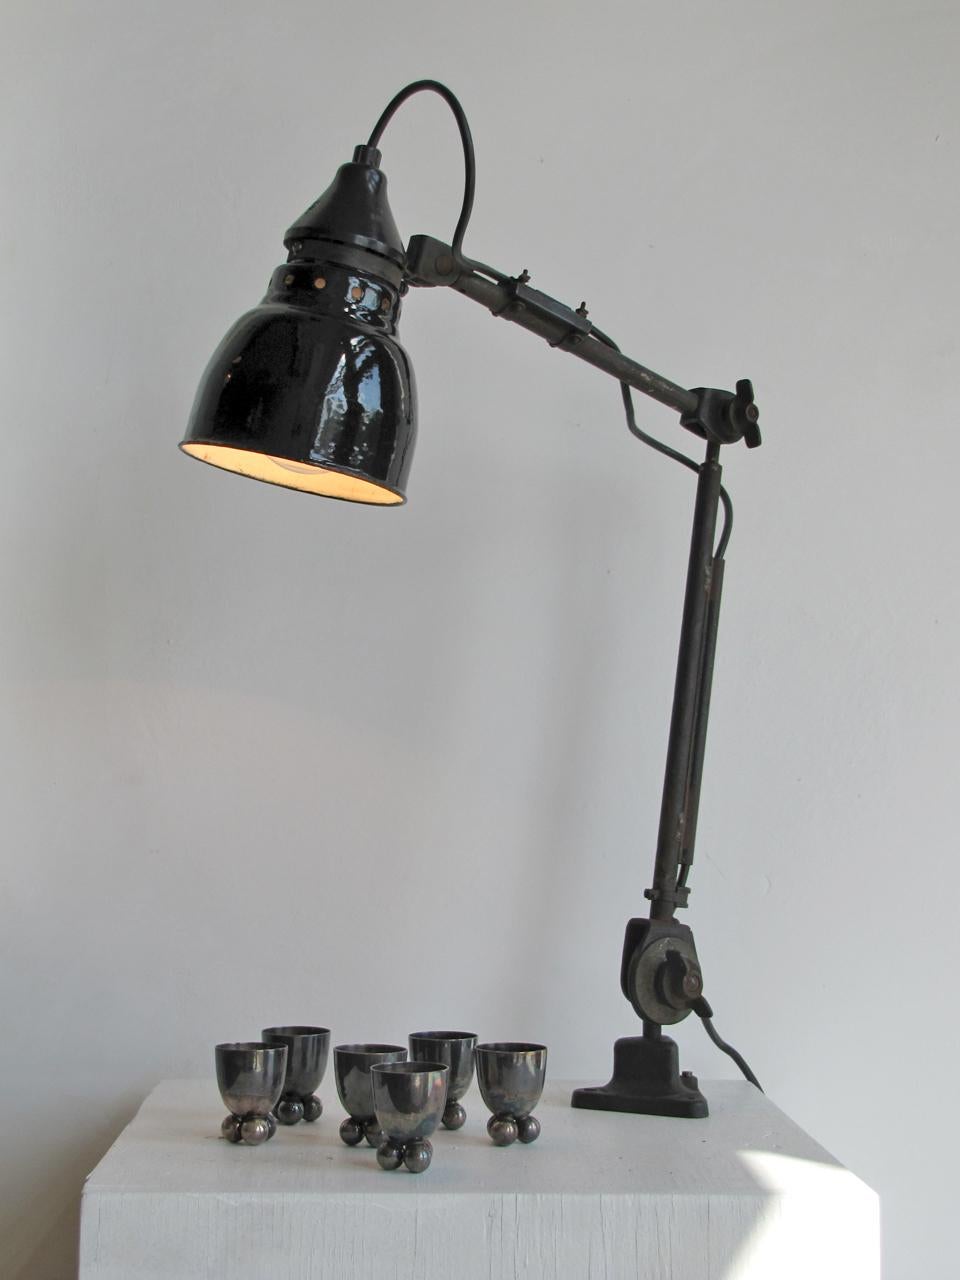 Wonderful 1930s articulate task lamp by Rademacher, Germany, fully adjustable with fixation to a table top or optional to a steel base, one E26 socket, max. wattage 75w or LED equivalent, wired for US standards, bulb provided as a onetime courtesy.